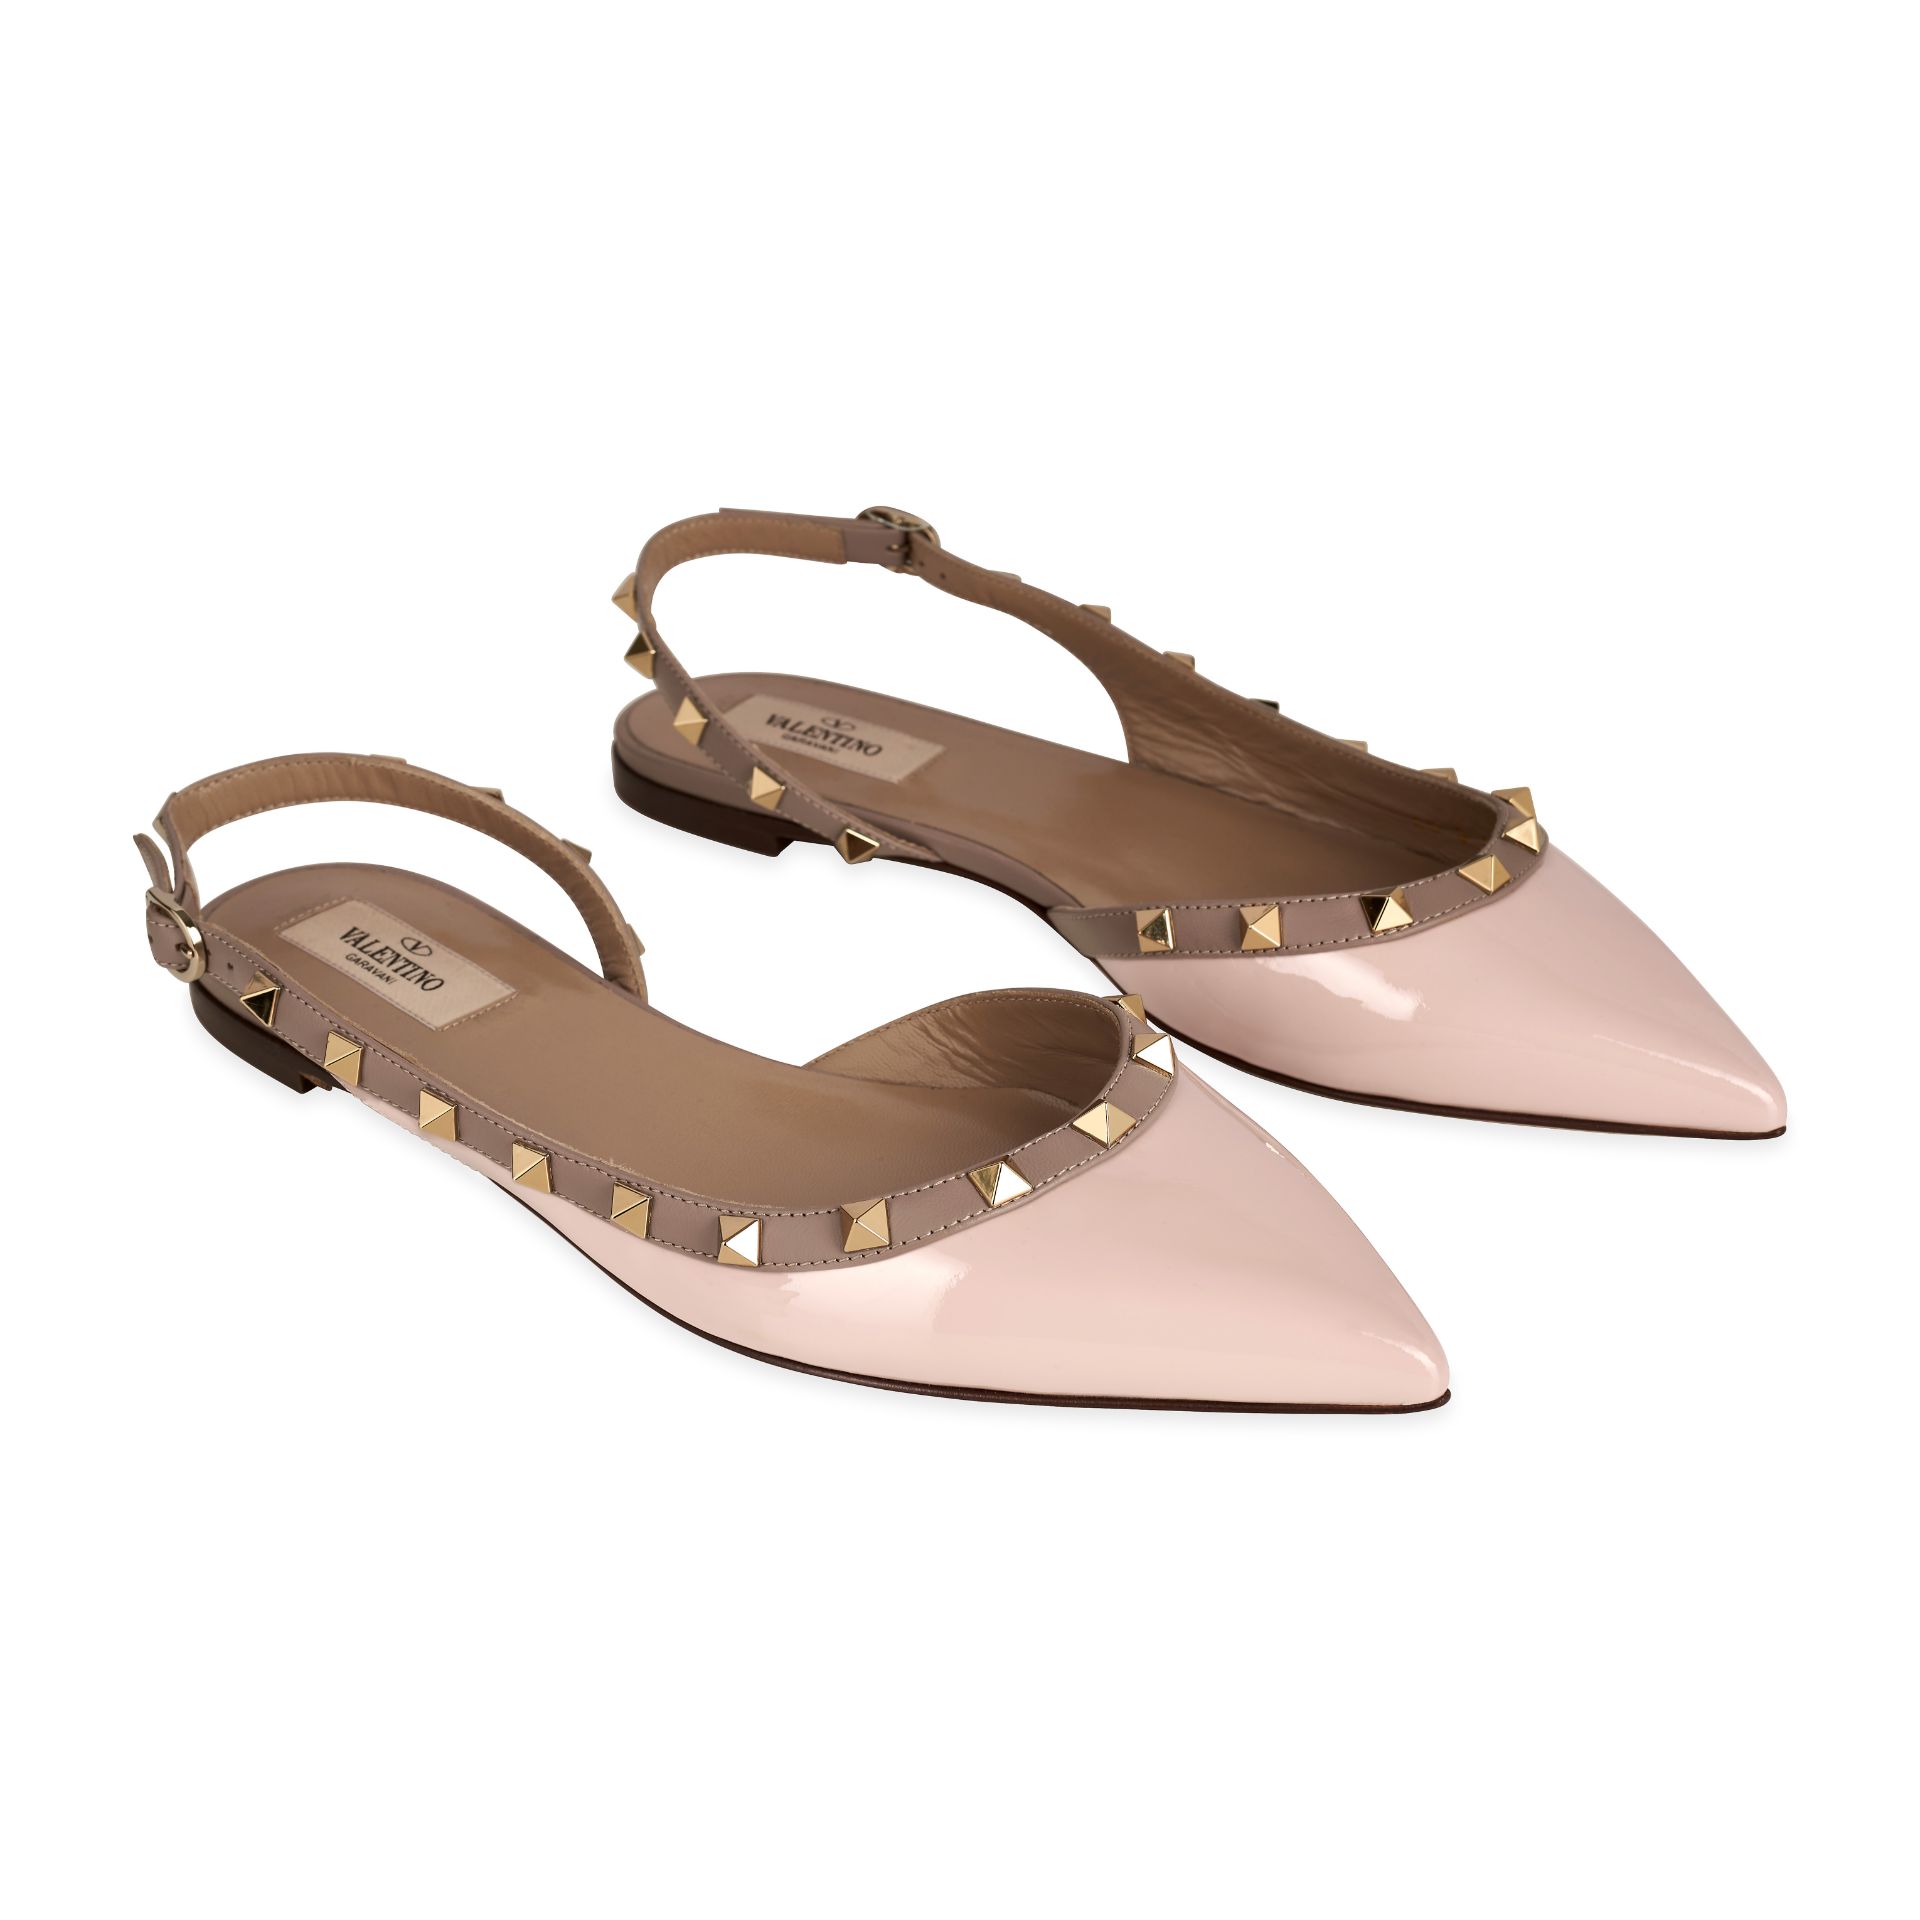 VALENTINO ROCKSTUD SLINGBACK FLATS  Condition grade A - unworn.  Size 39. Pale pink patent leat...